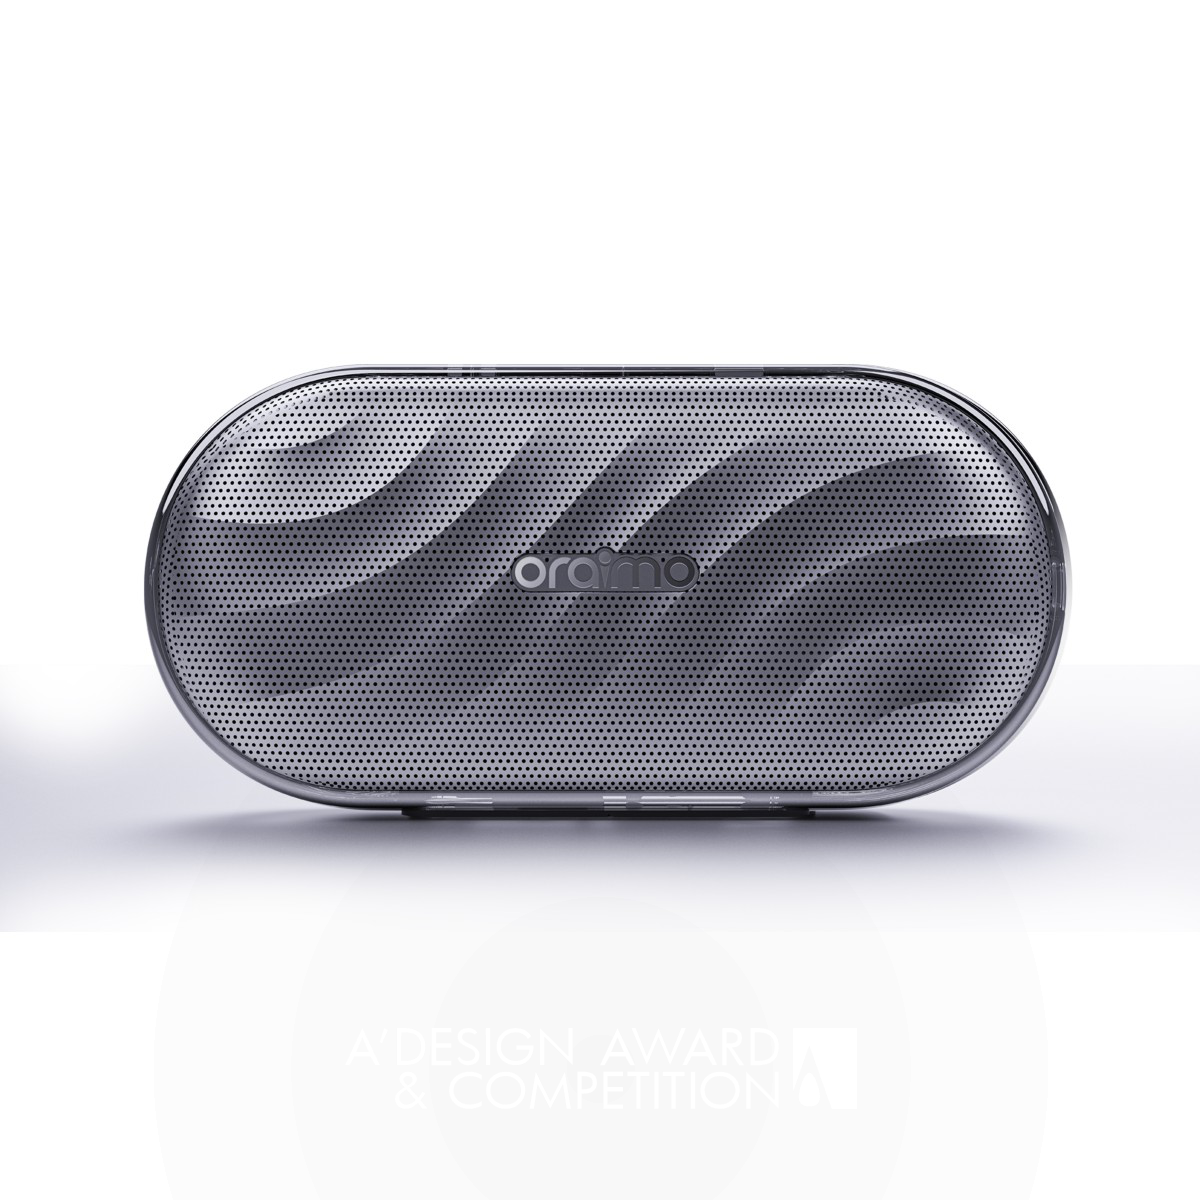 Oraimo Obs300 Speaker by Shenzhen Transsion Holdings Co., Limited